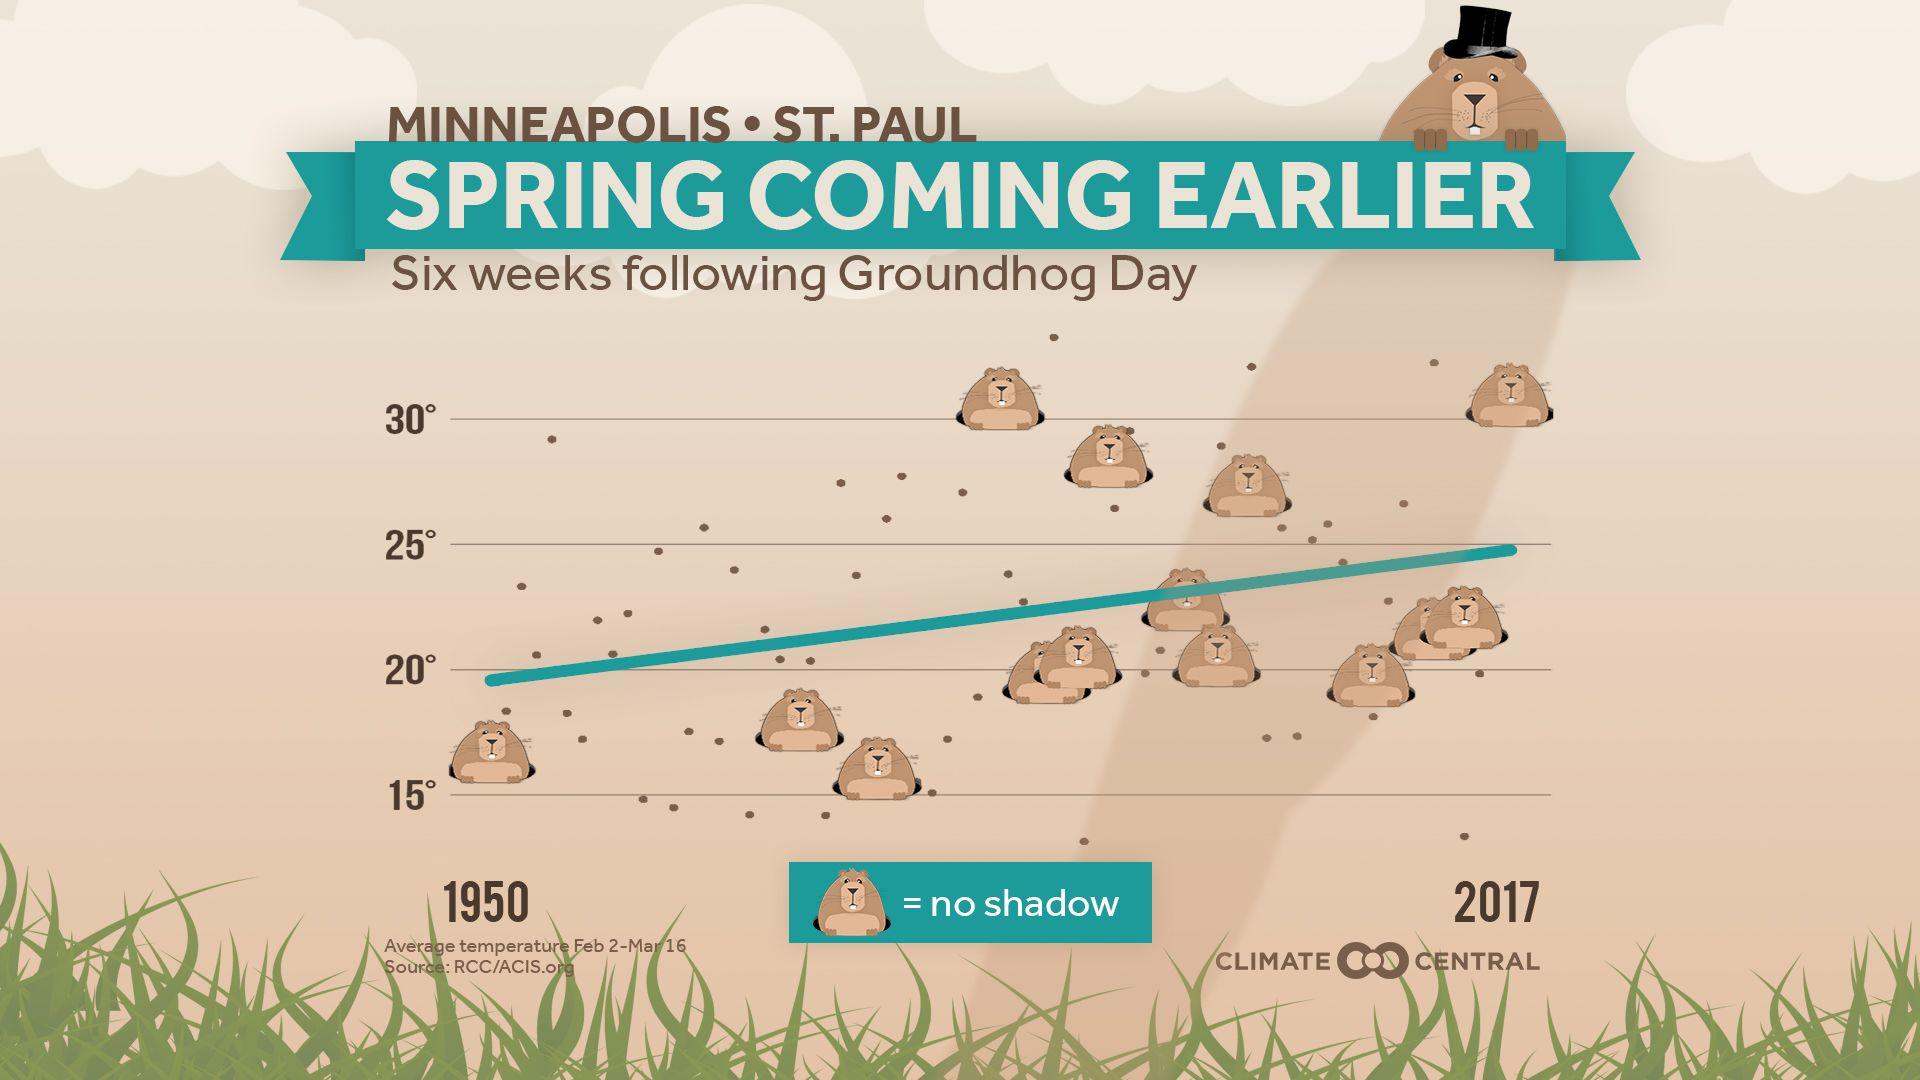 Groundhog Day: Spring Coming Earlier